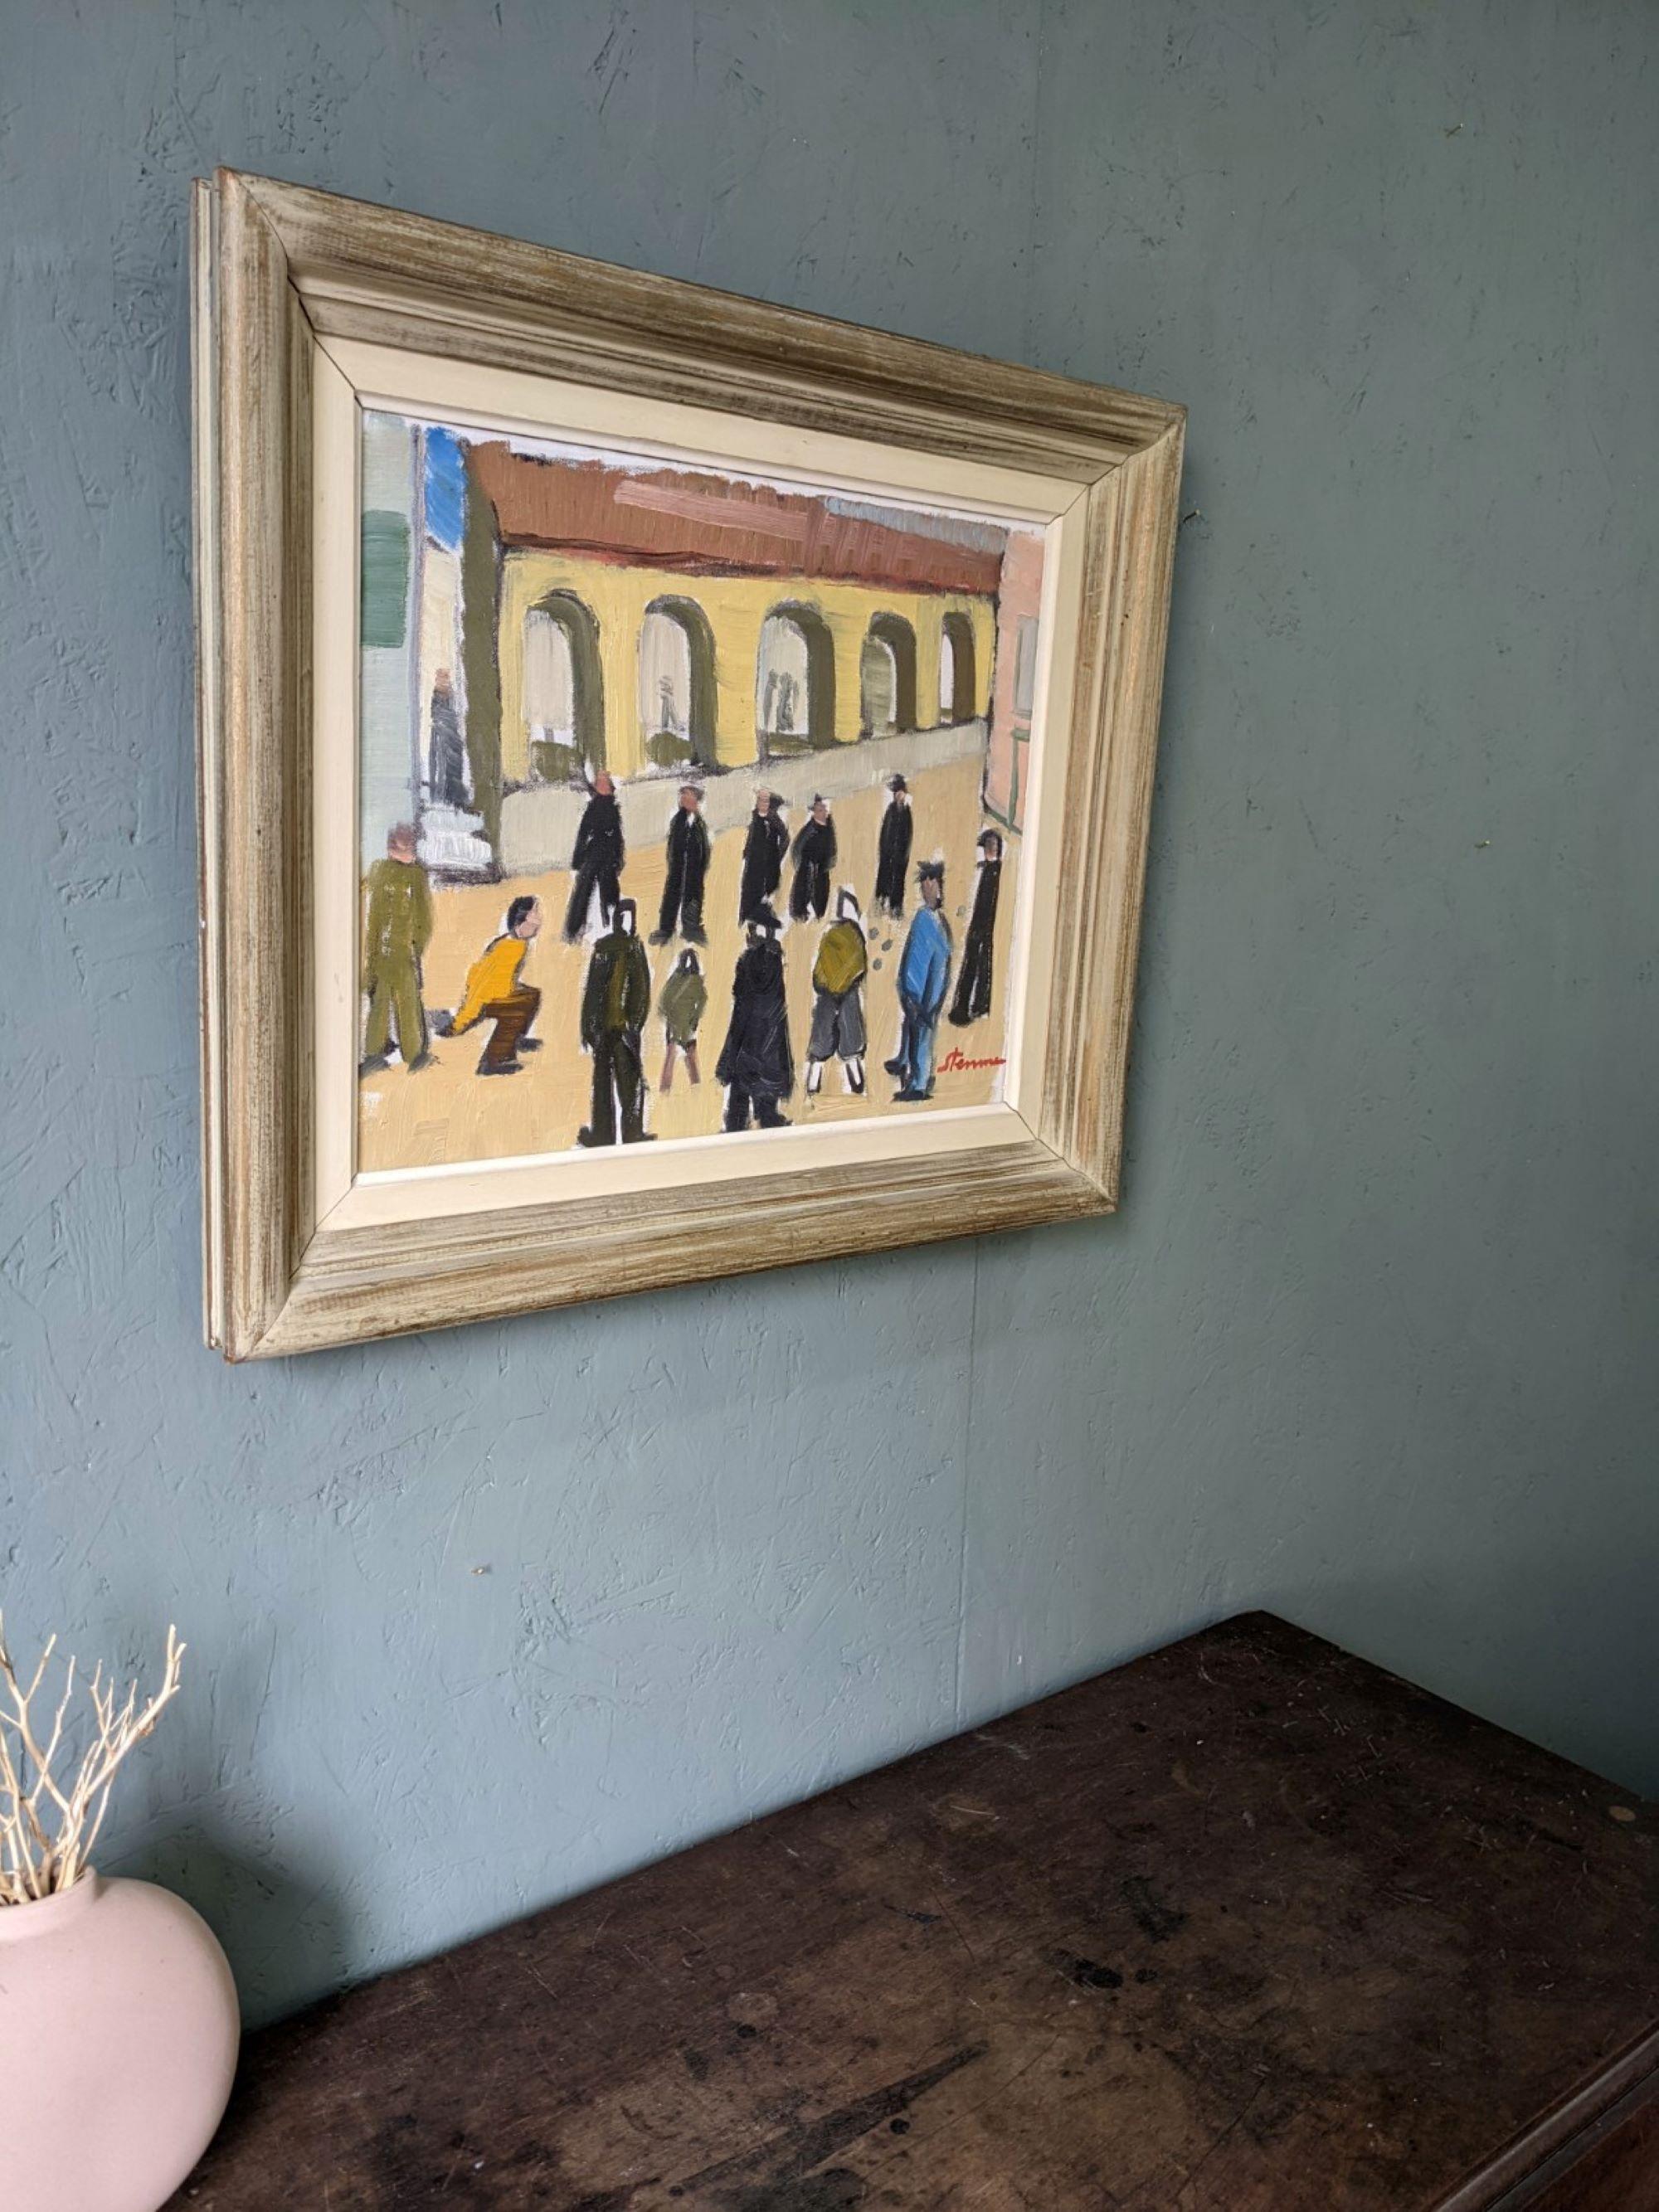 A GAME OF PETANQUE
Size: 46 x 54 cm (including frame)
Oil on canvas

A fun and charming mid-century narrative oil painting depicting a group of figures in the middle of a town square engaging in a game of pétanque.

The use of expressive